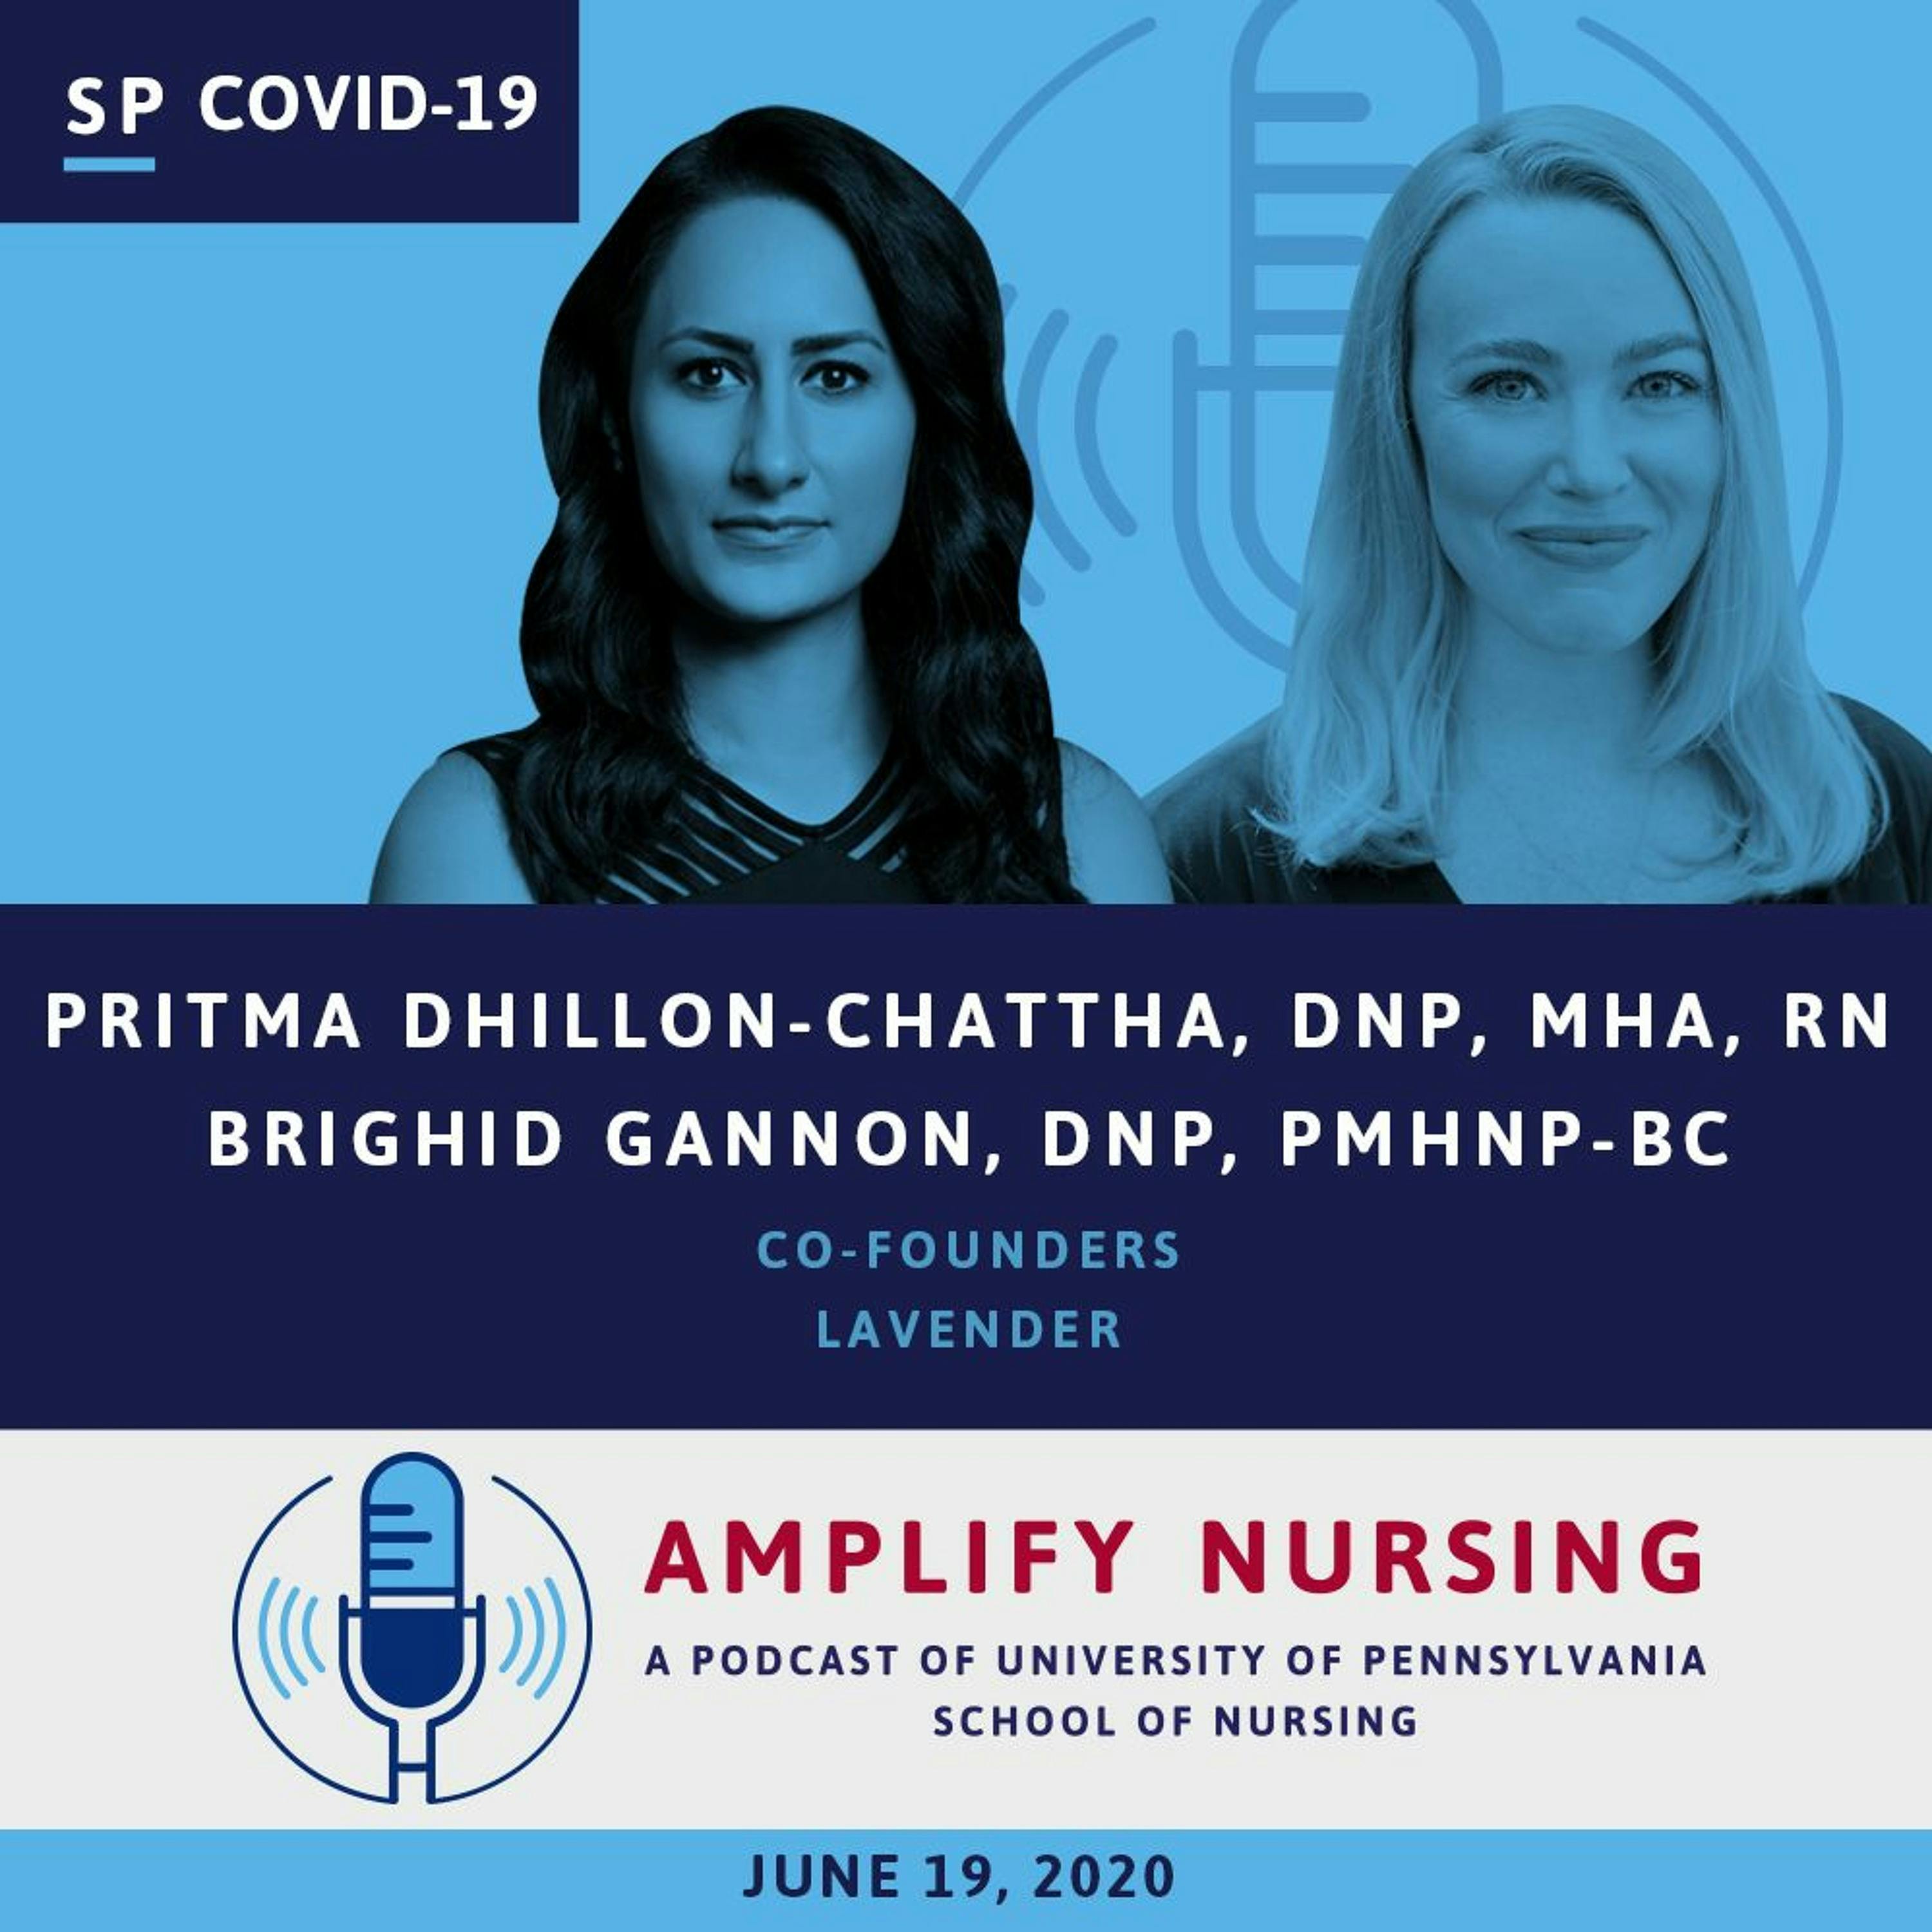 Amplify Nursing: Special Episode: Dr. Pritma Dhillon-Chattha and Dr. Brighid Gannon